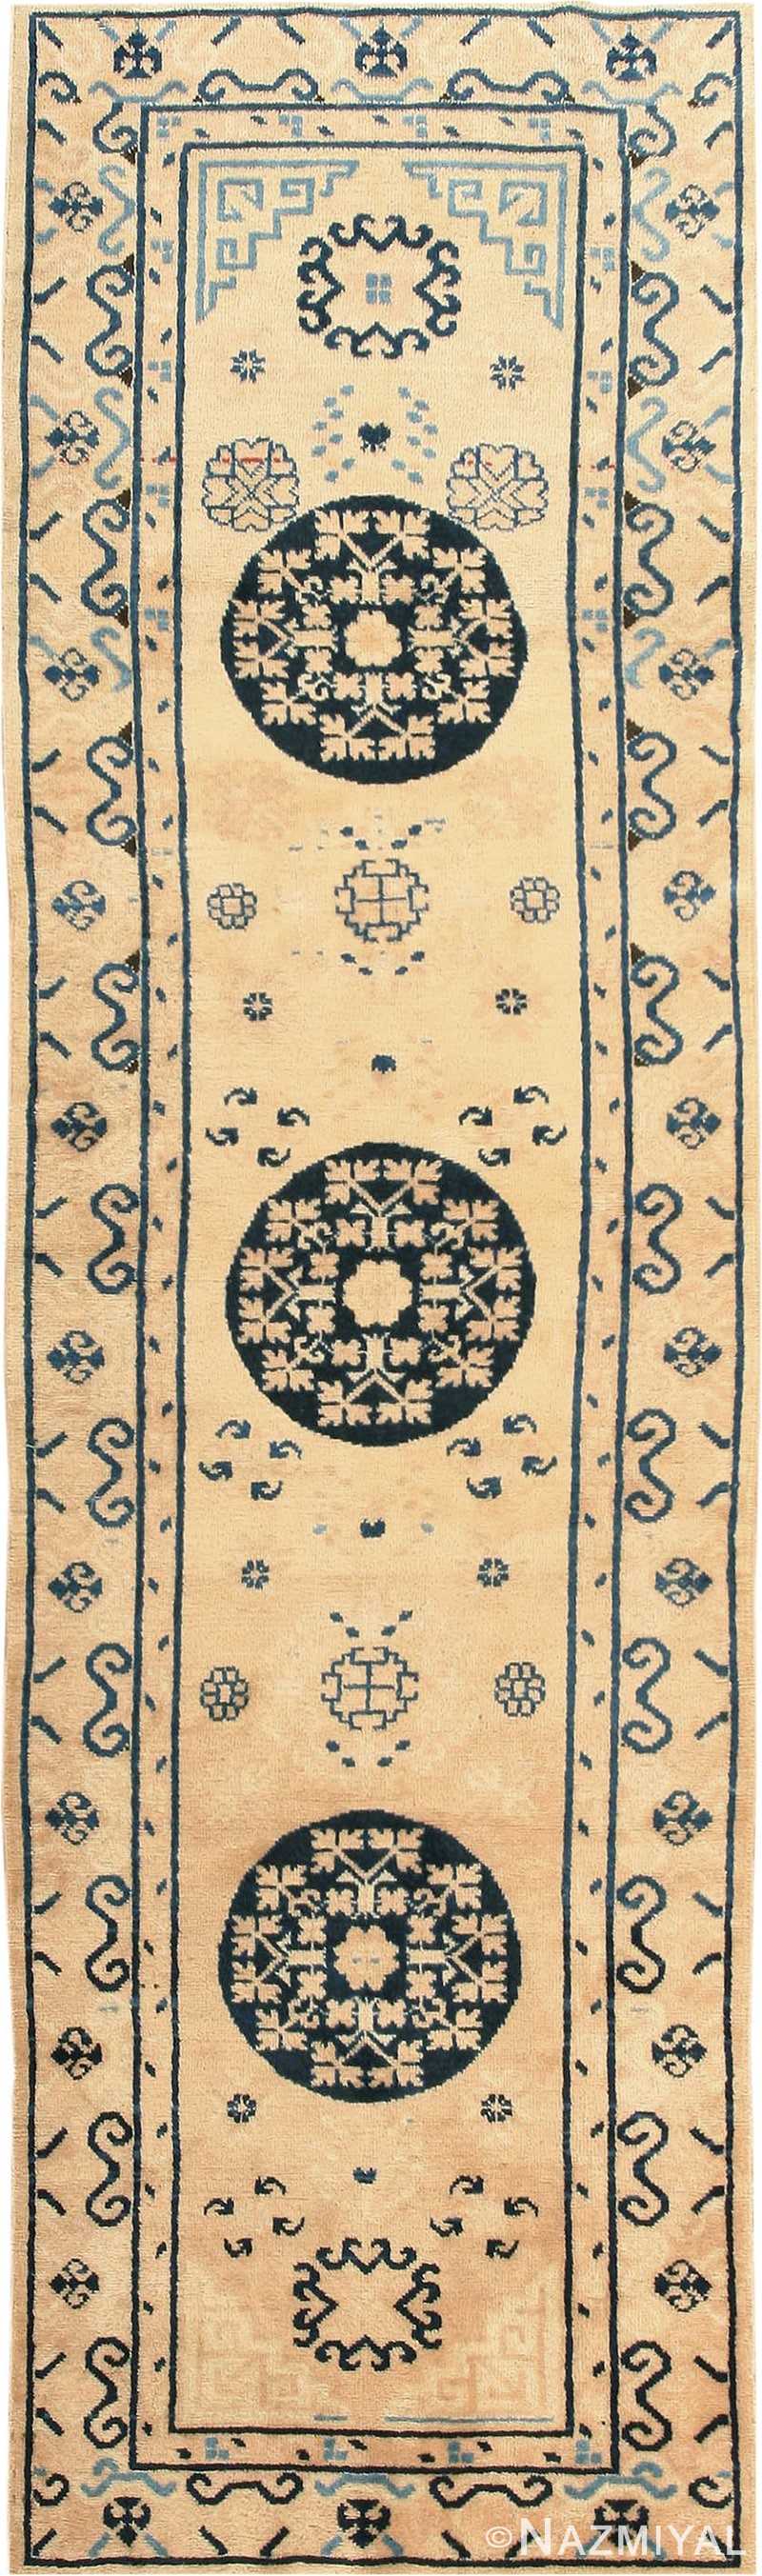 Decorative Ivory and Blue Antique Khotan Runner Rug #42193 by Nazmiyal Antique Rugs